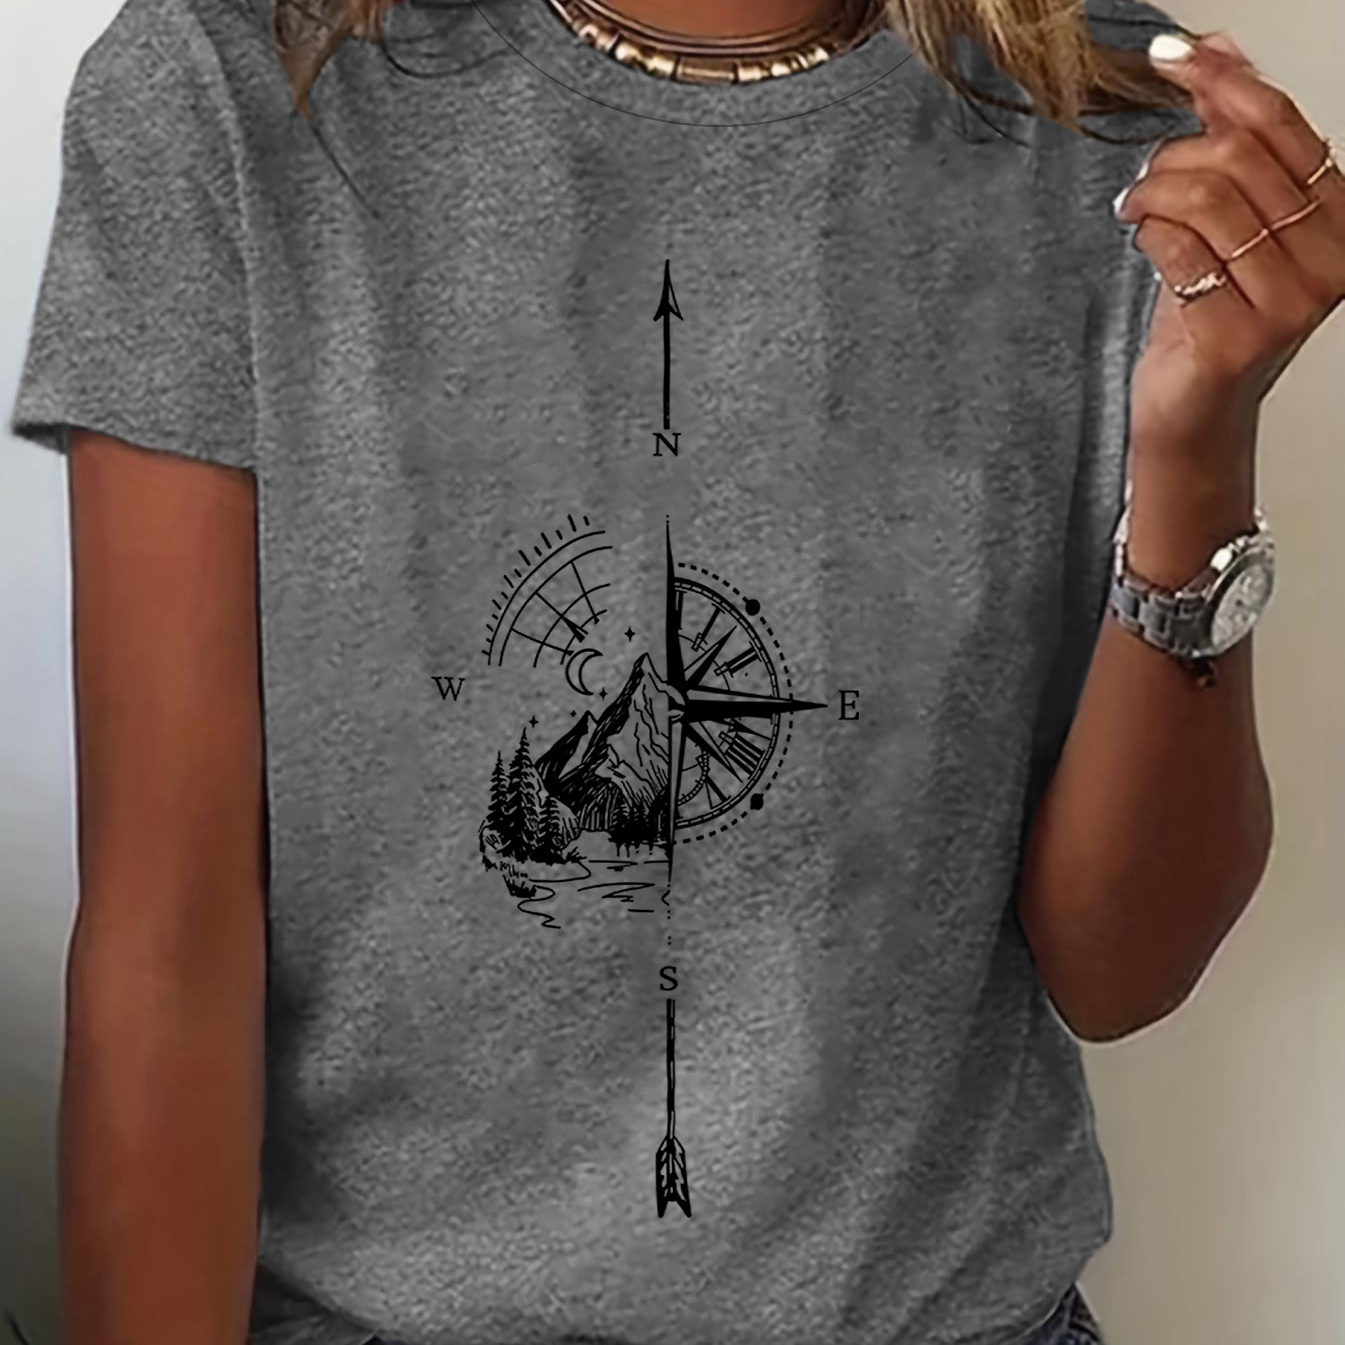 

Compass & Mountains Graphic Print T-shirt, Short Sleeve Crew Neck Casual Top For Summer & Spring, Women's Clothing